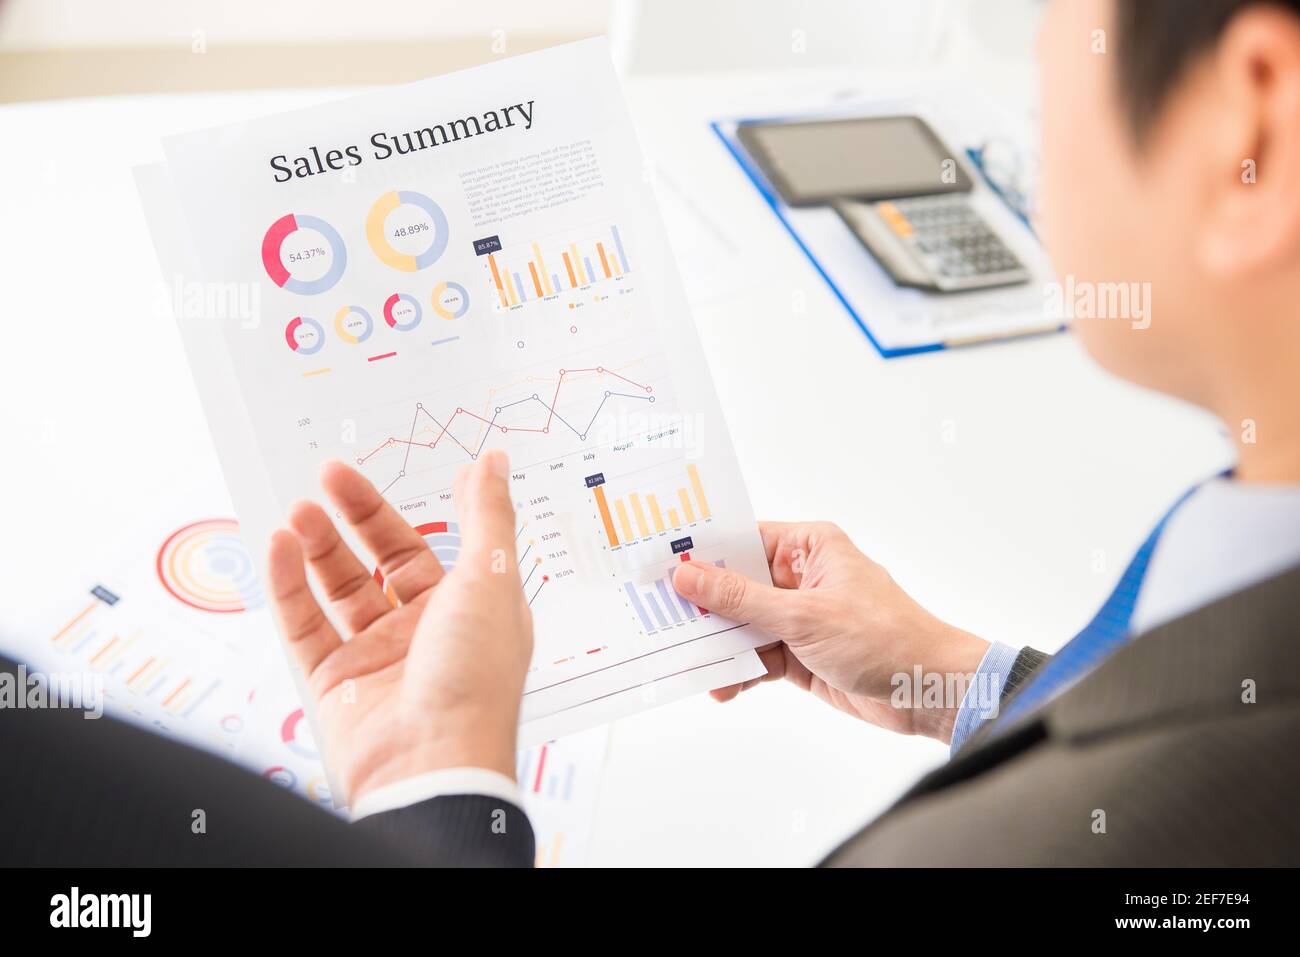 Businessmen discussing and analyzing Sales Summary documents Stock Photo